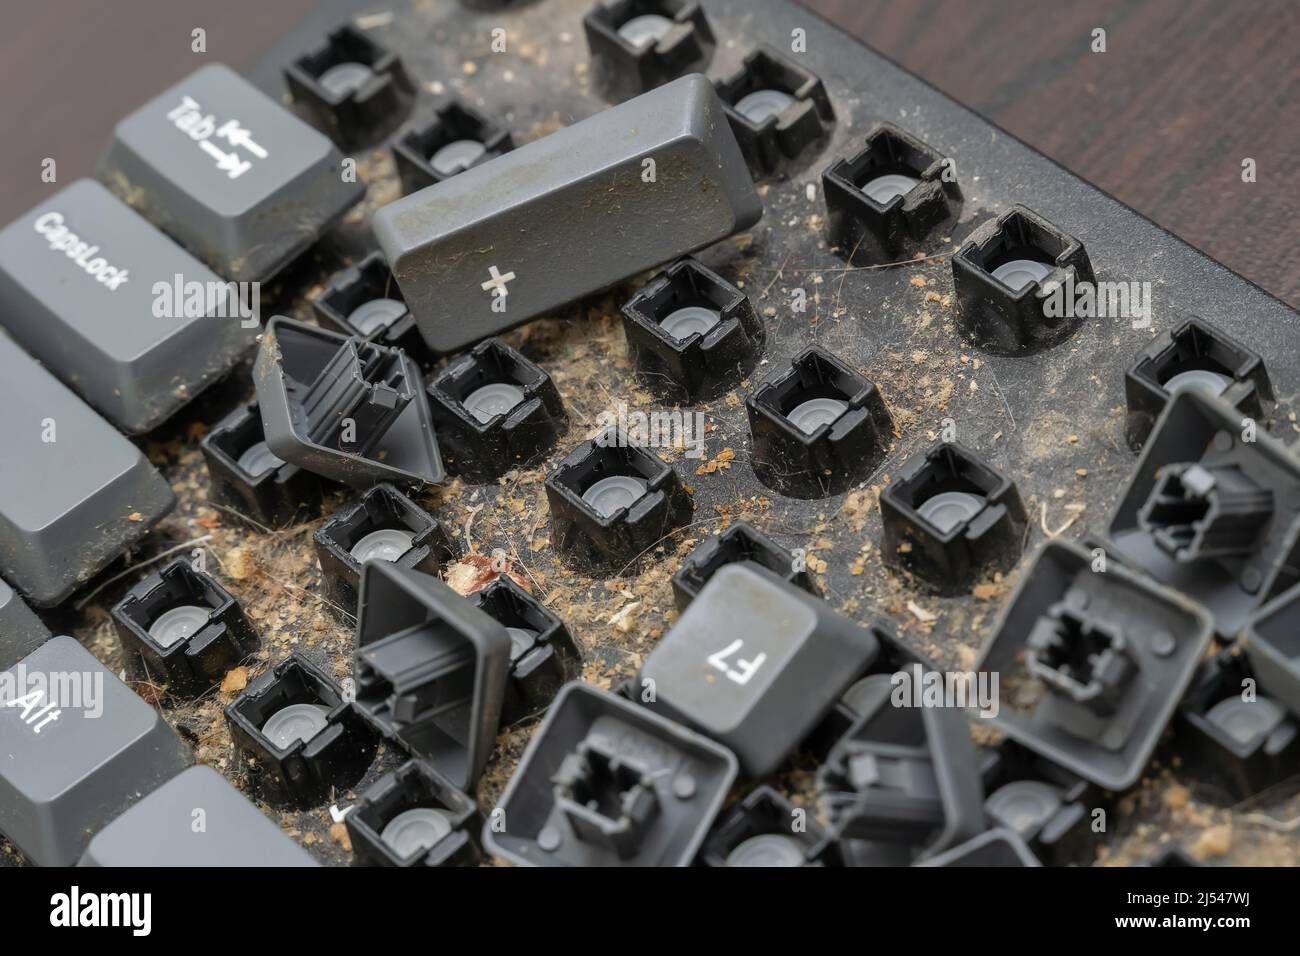 Close-up of a very dirty disassembled computer keyboard on the table. Disassembling a computer keyboard with your own hands, cleaning the keyboard Stock Photo